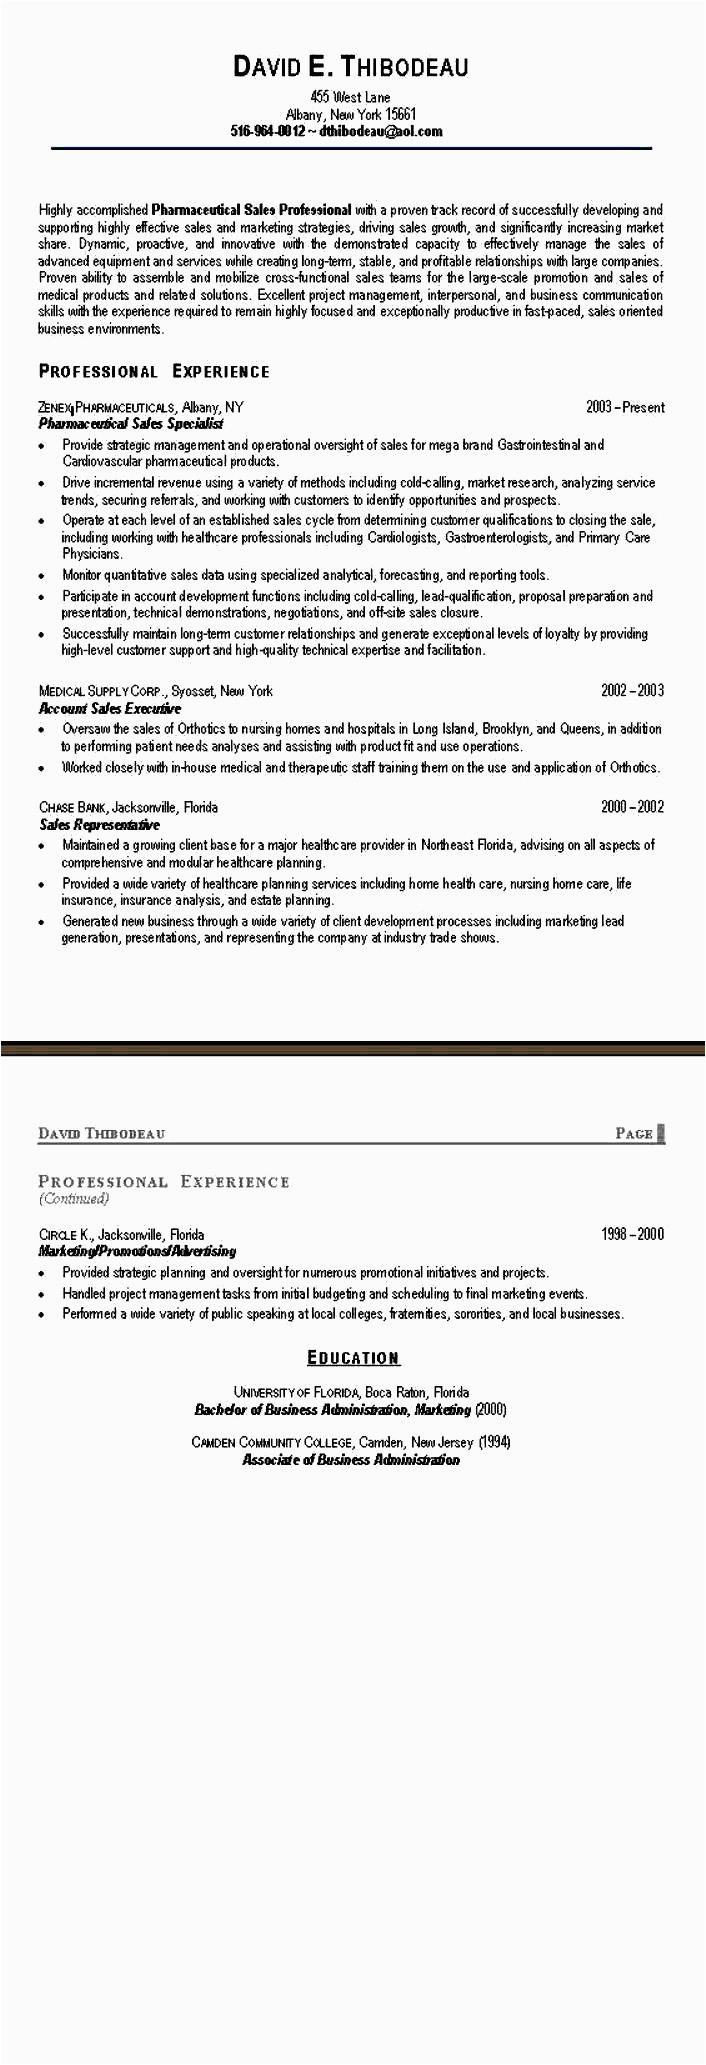 Sample Resume format for Purchase Executive Sample Resume Purchase Executive